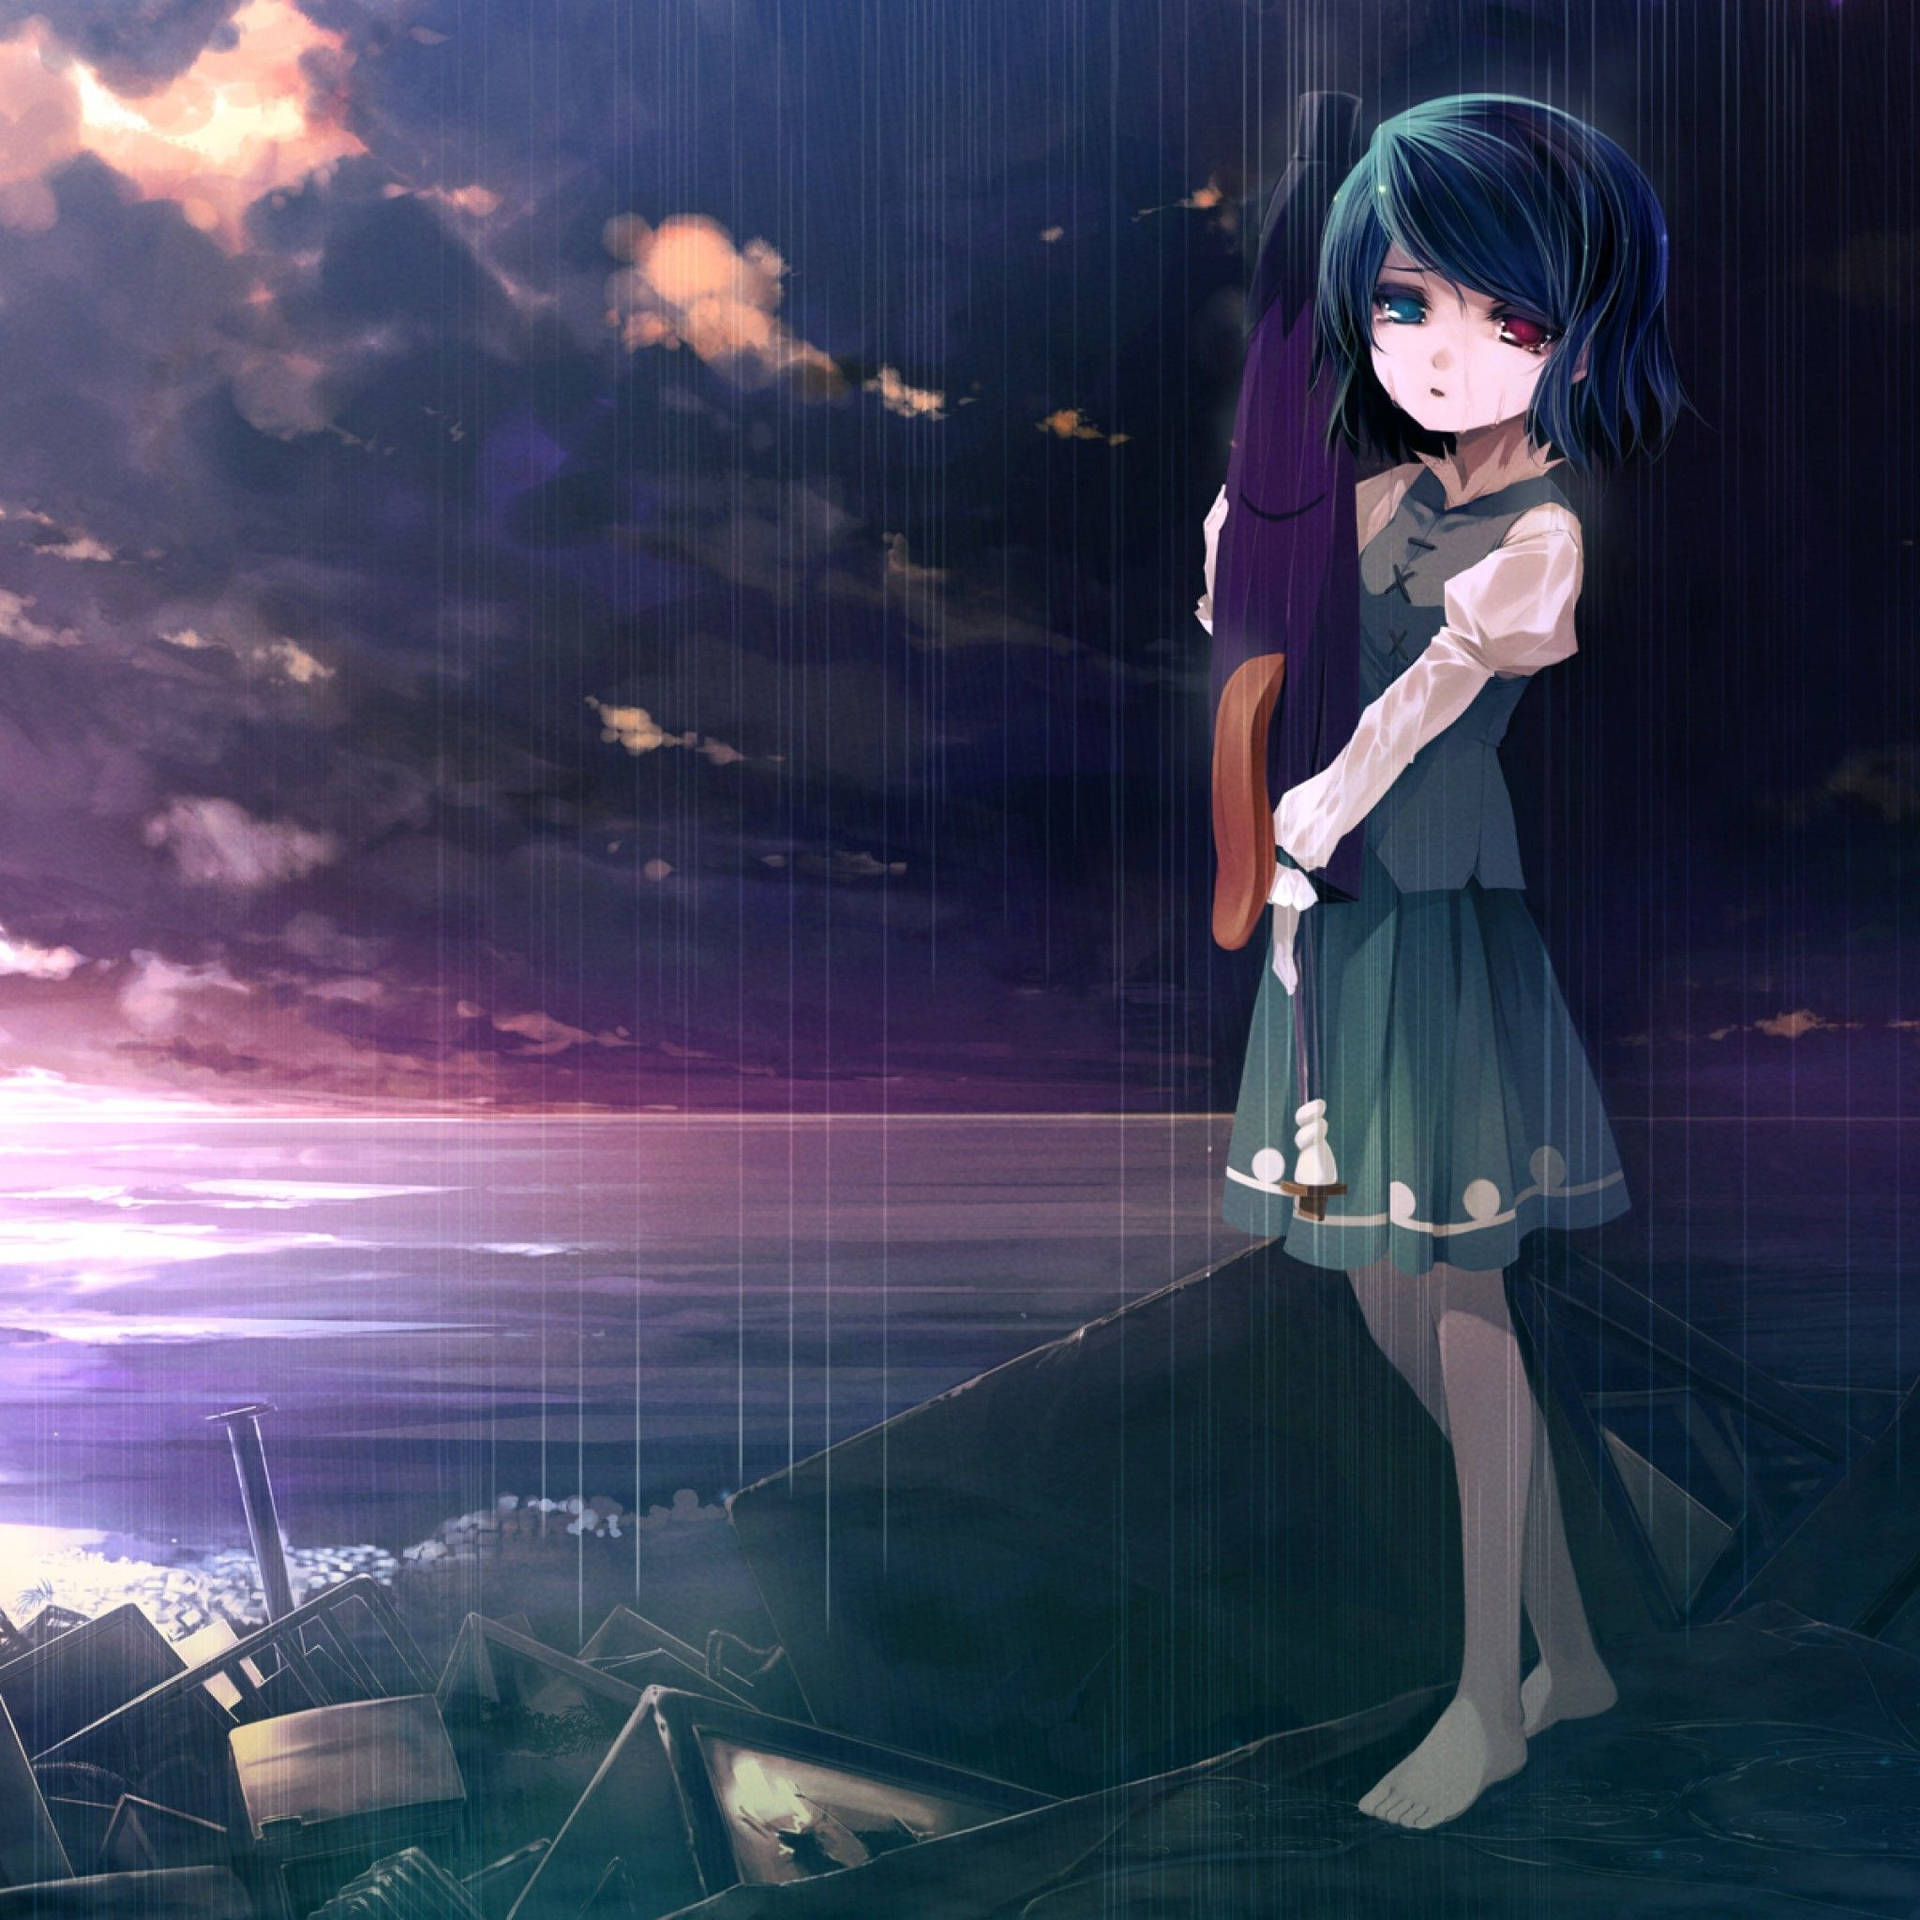 Anime Girl Sad Alone By The Ocean Background